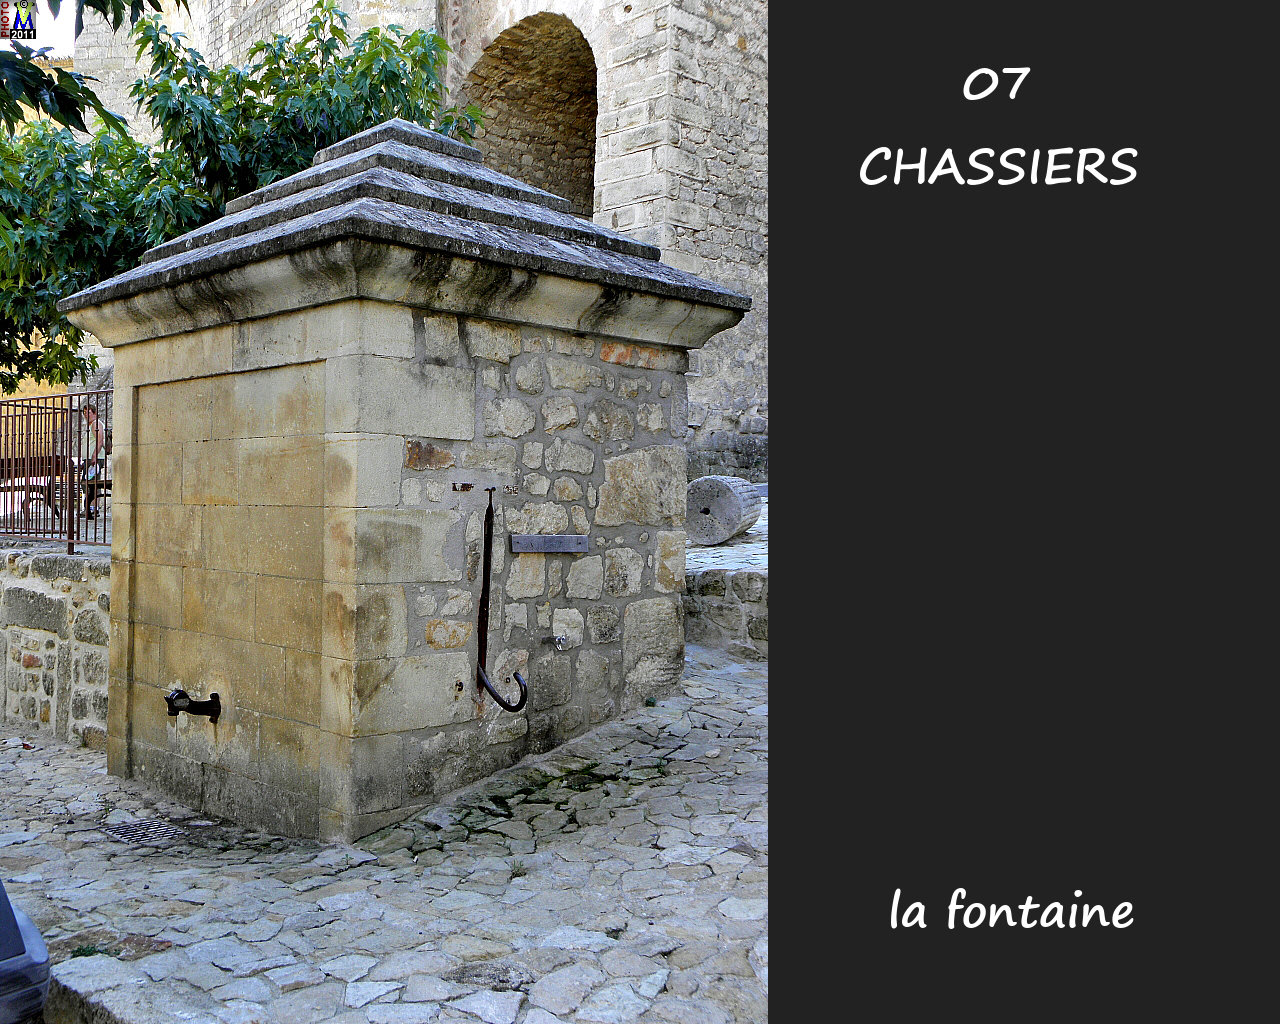 07CHASSIERS_fontaine_100.jpg